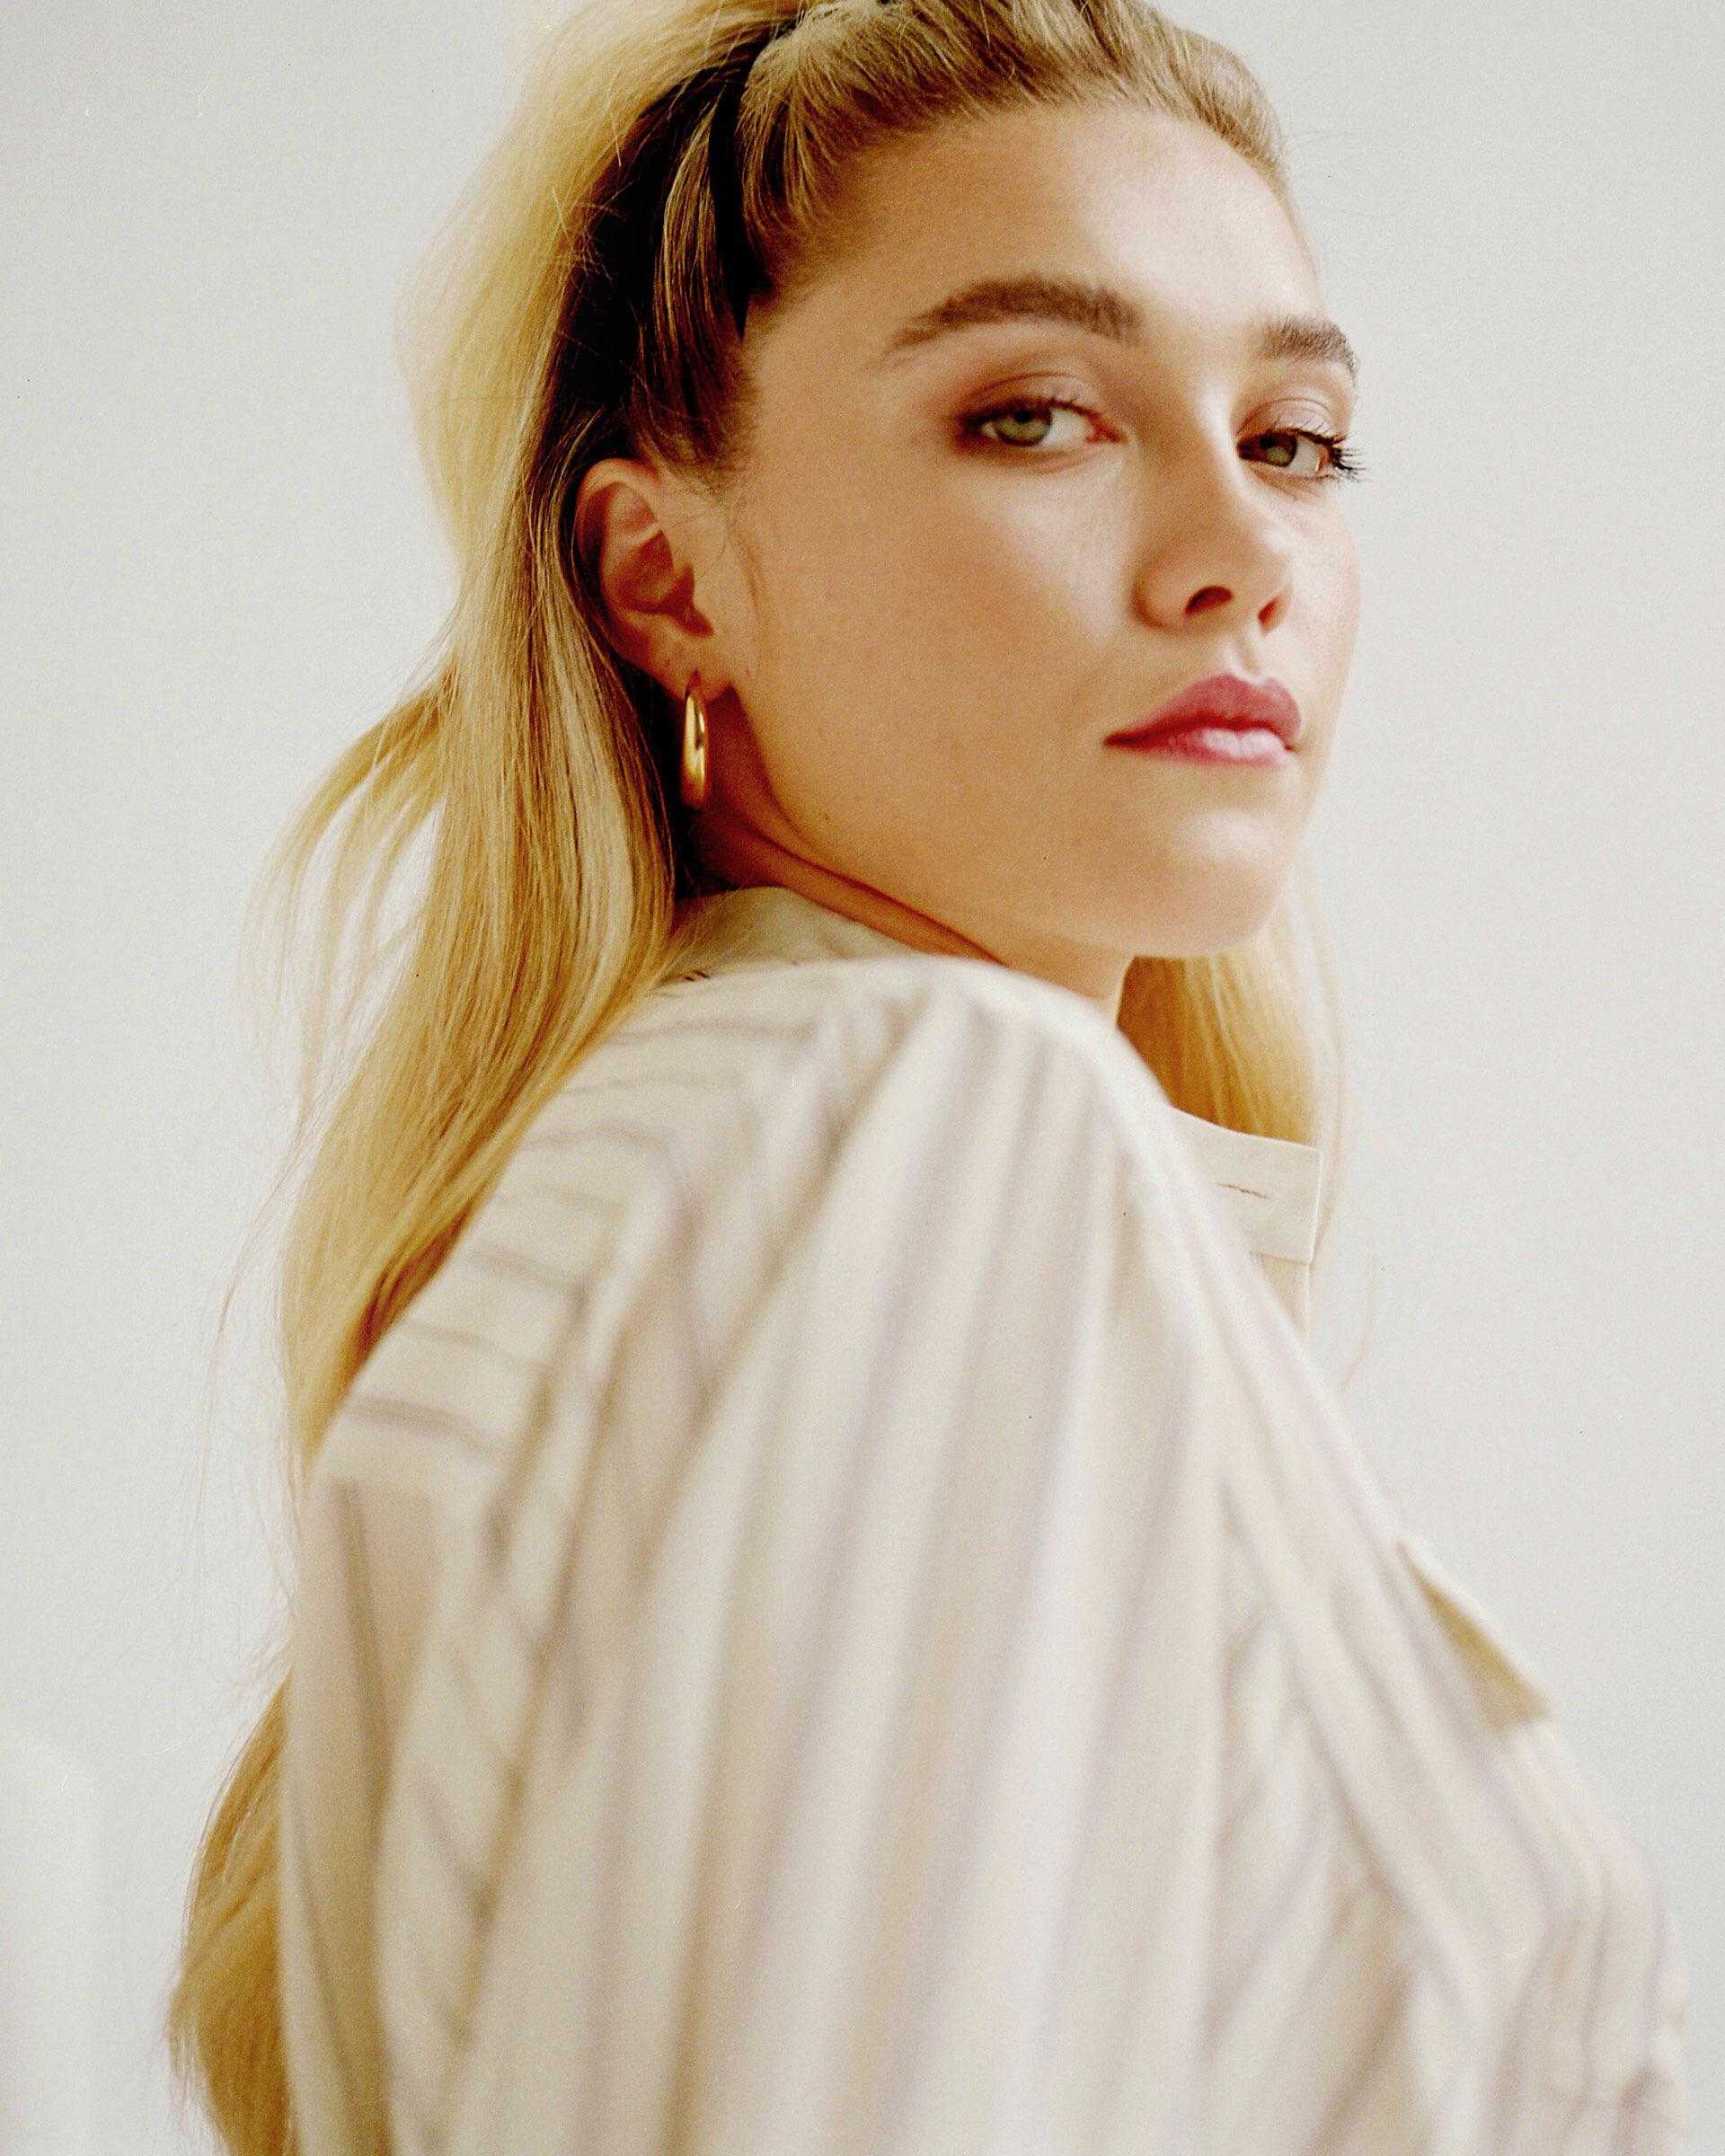 A woman with blonde hair in a ponytail wearing a white shirt. - Florence Pugh